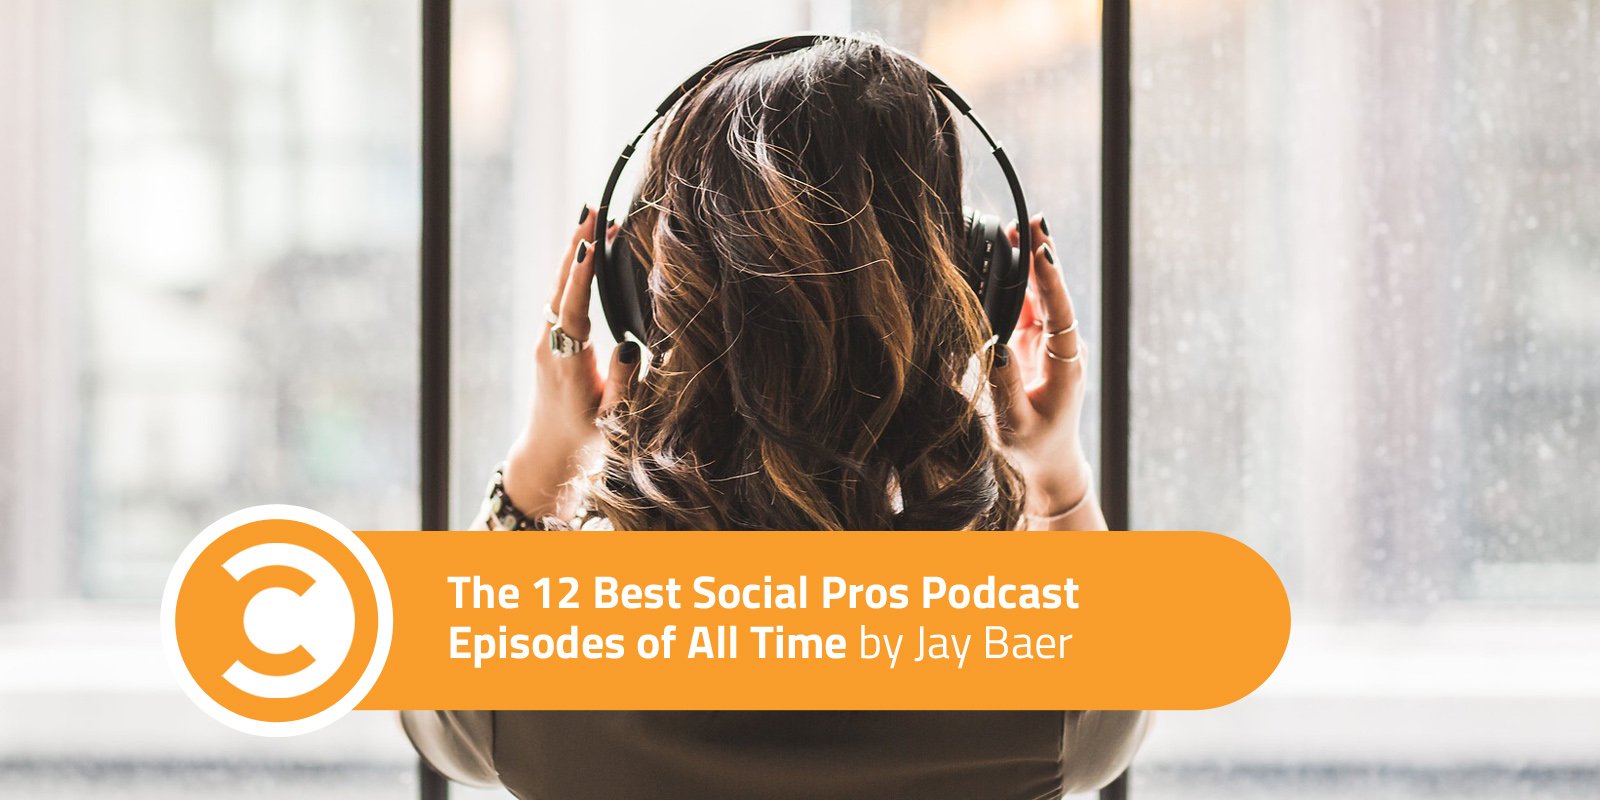 The 12 Best Social Pros Podcast Episodes of All Time